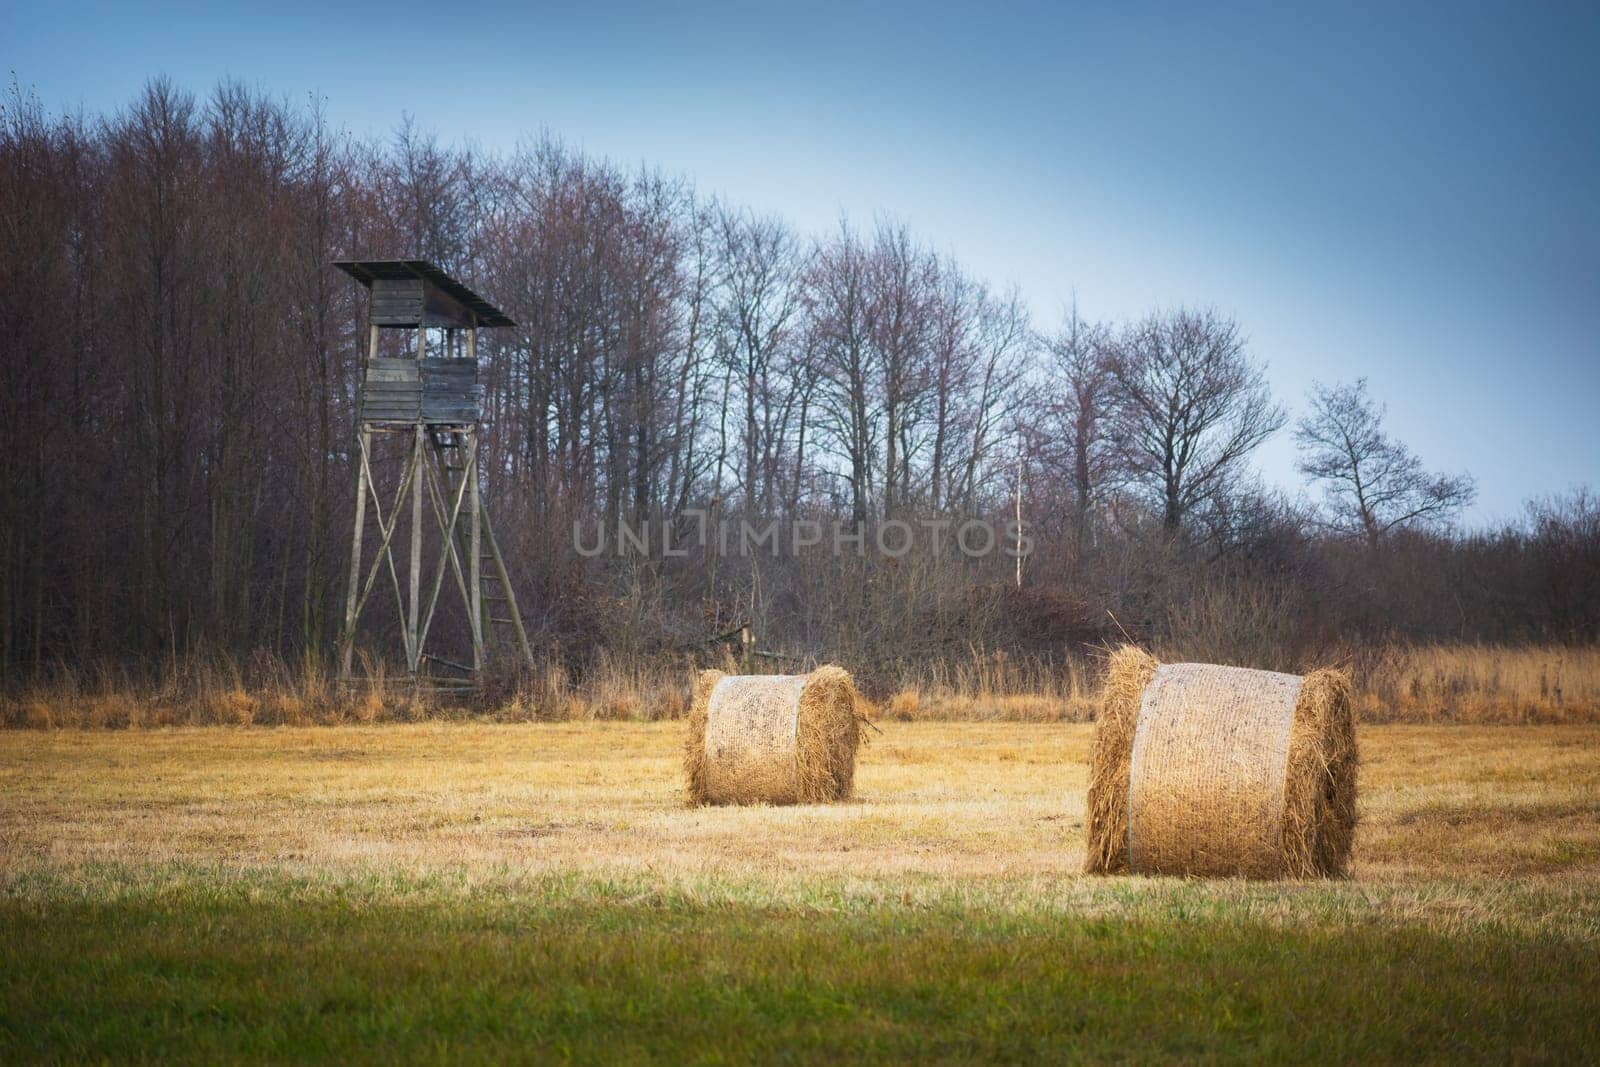 Bales of hay in the field next to the hunting pulpit by darekb22